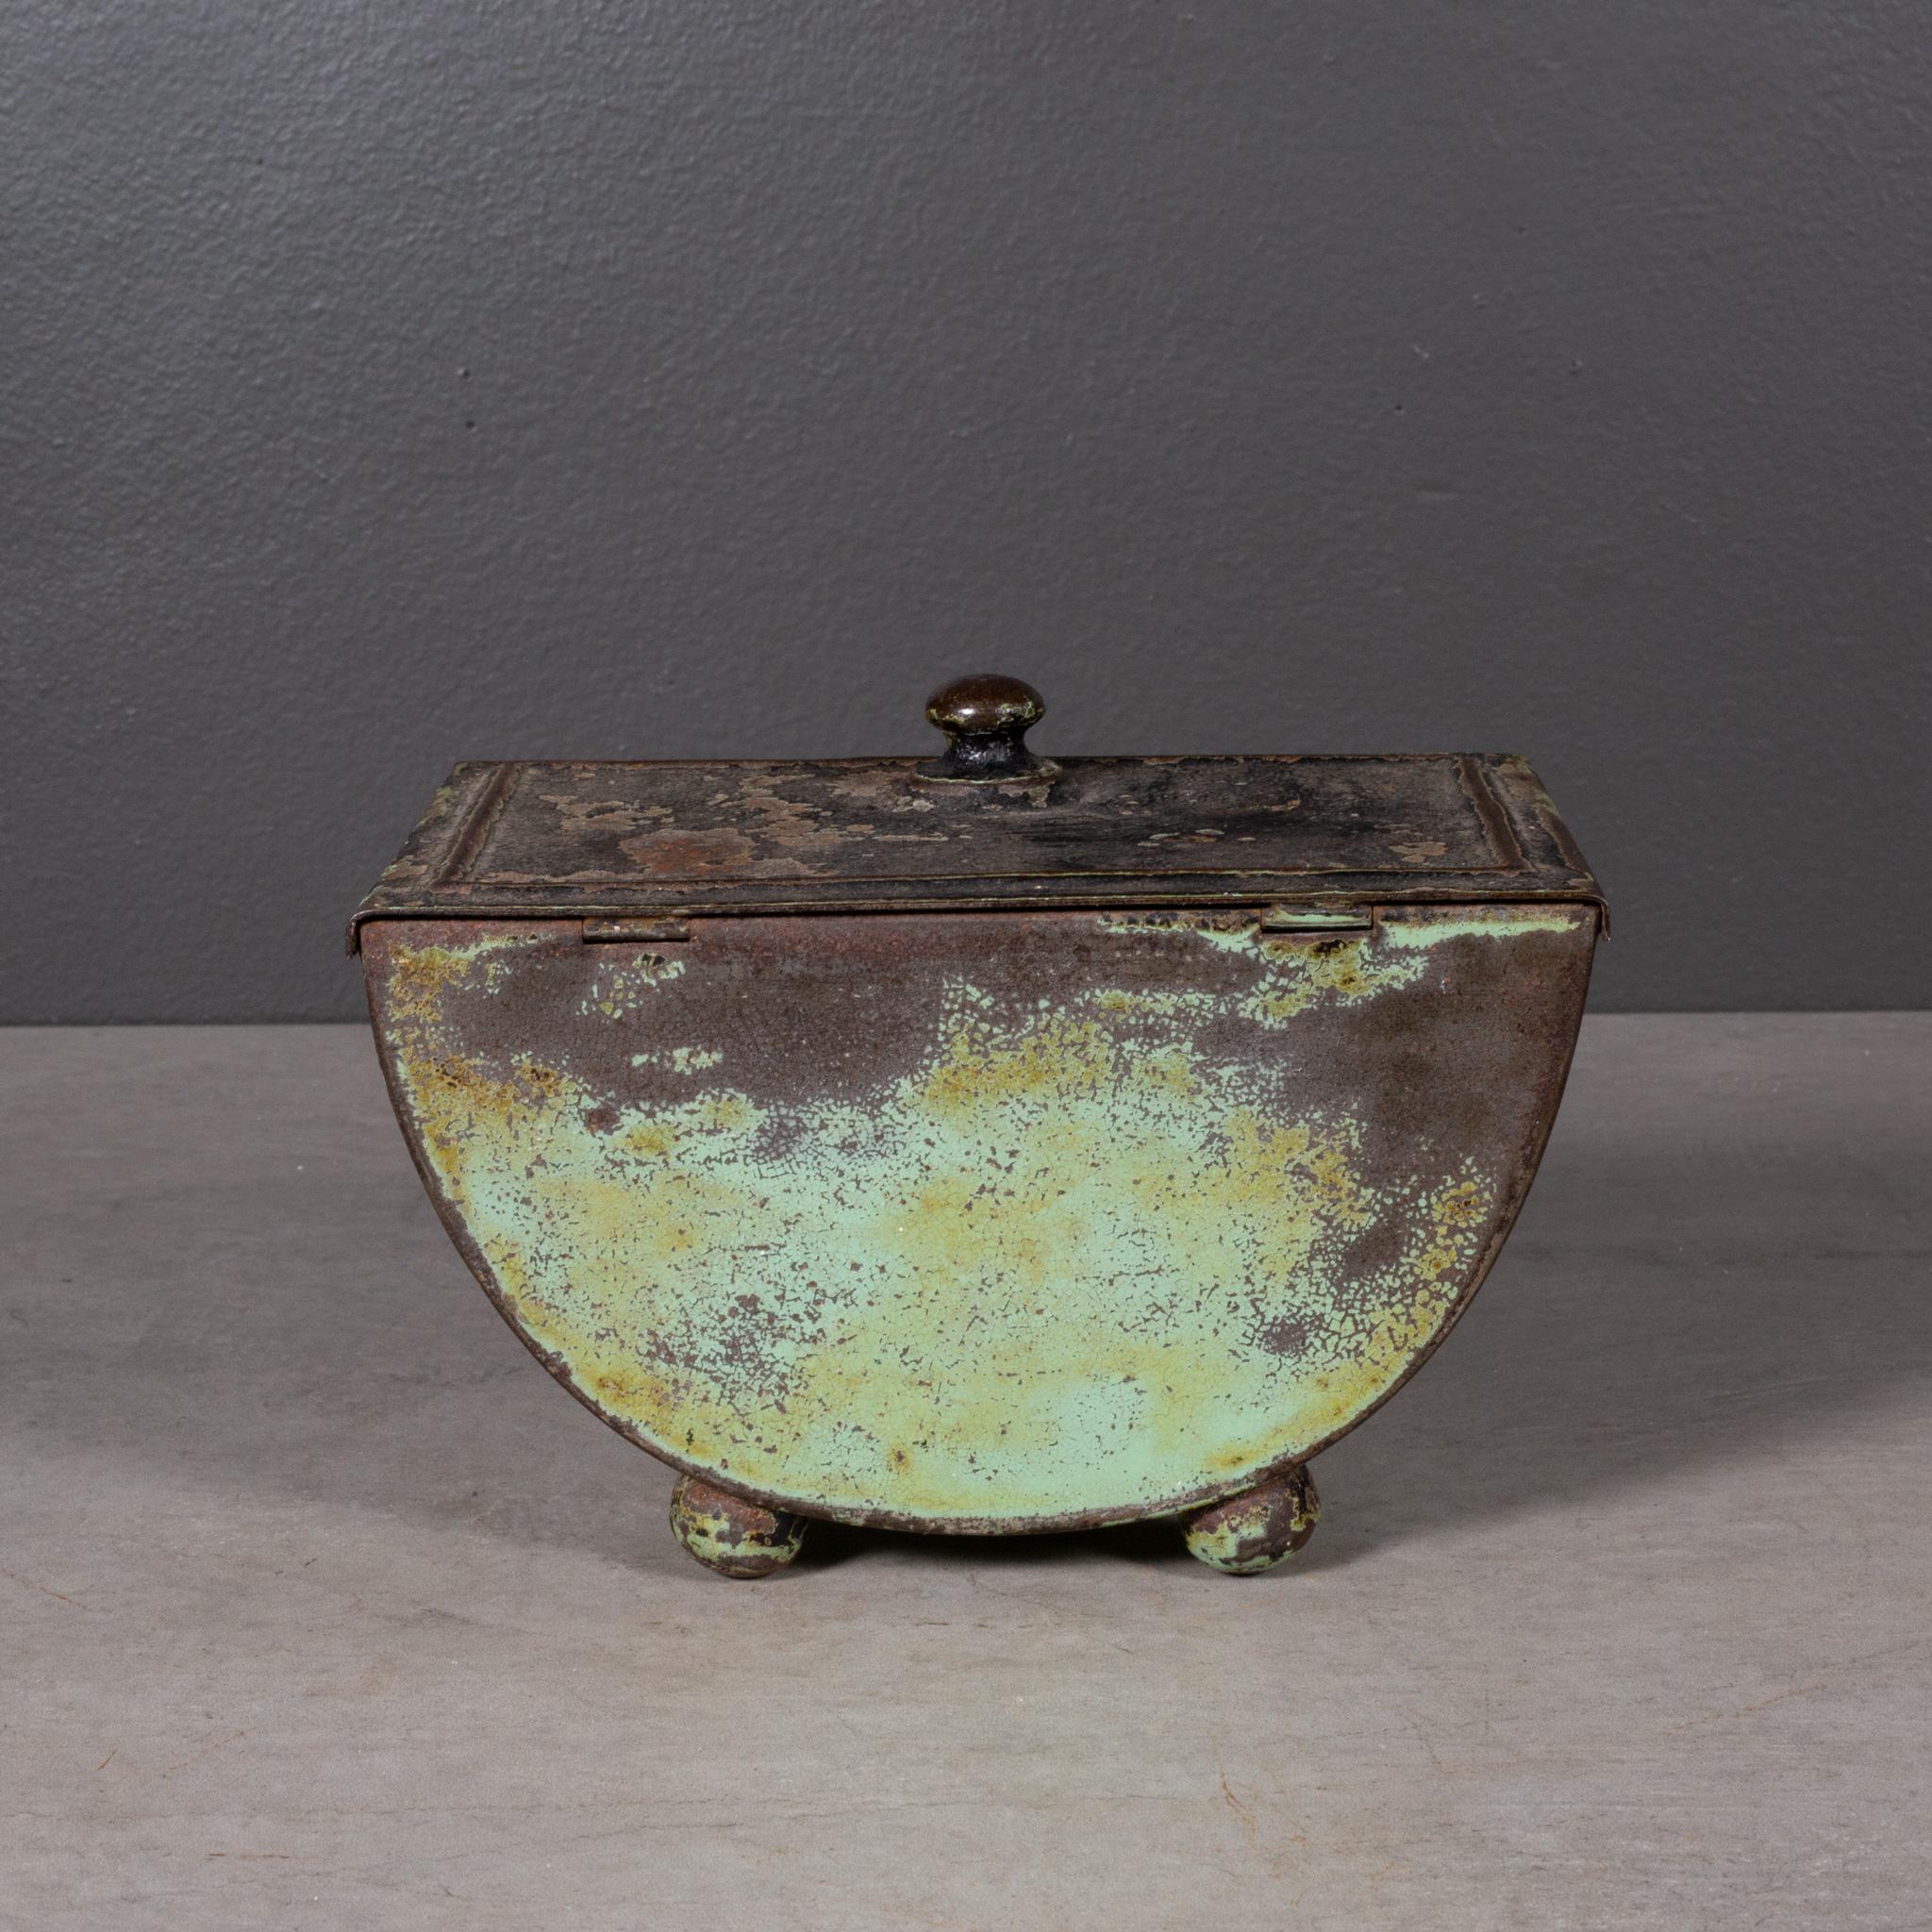 Plated 19th c. English Toleware Tea Bin c.mid-1800s (FREE SHIPPING) For Sale